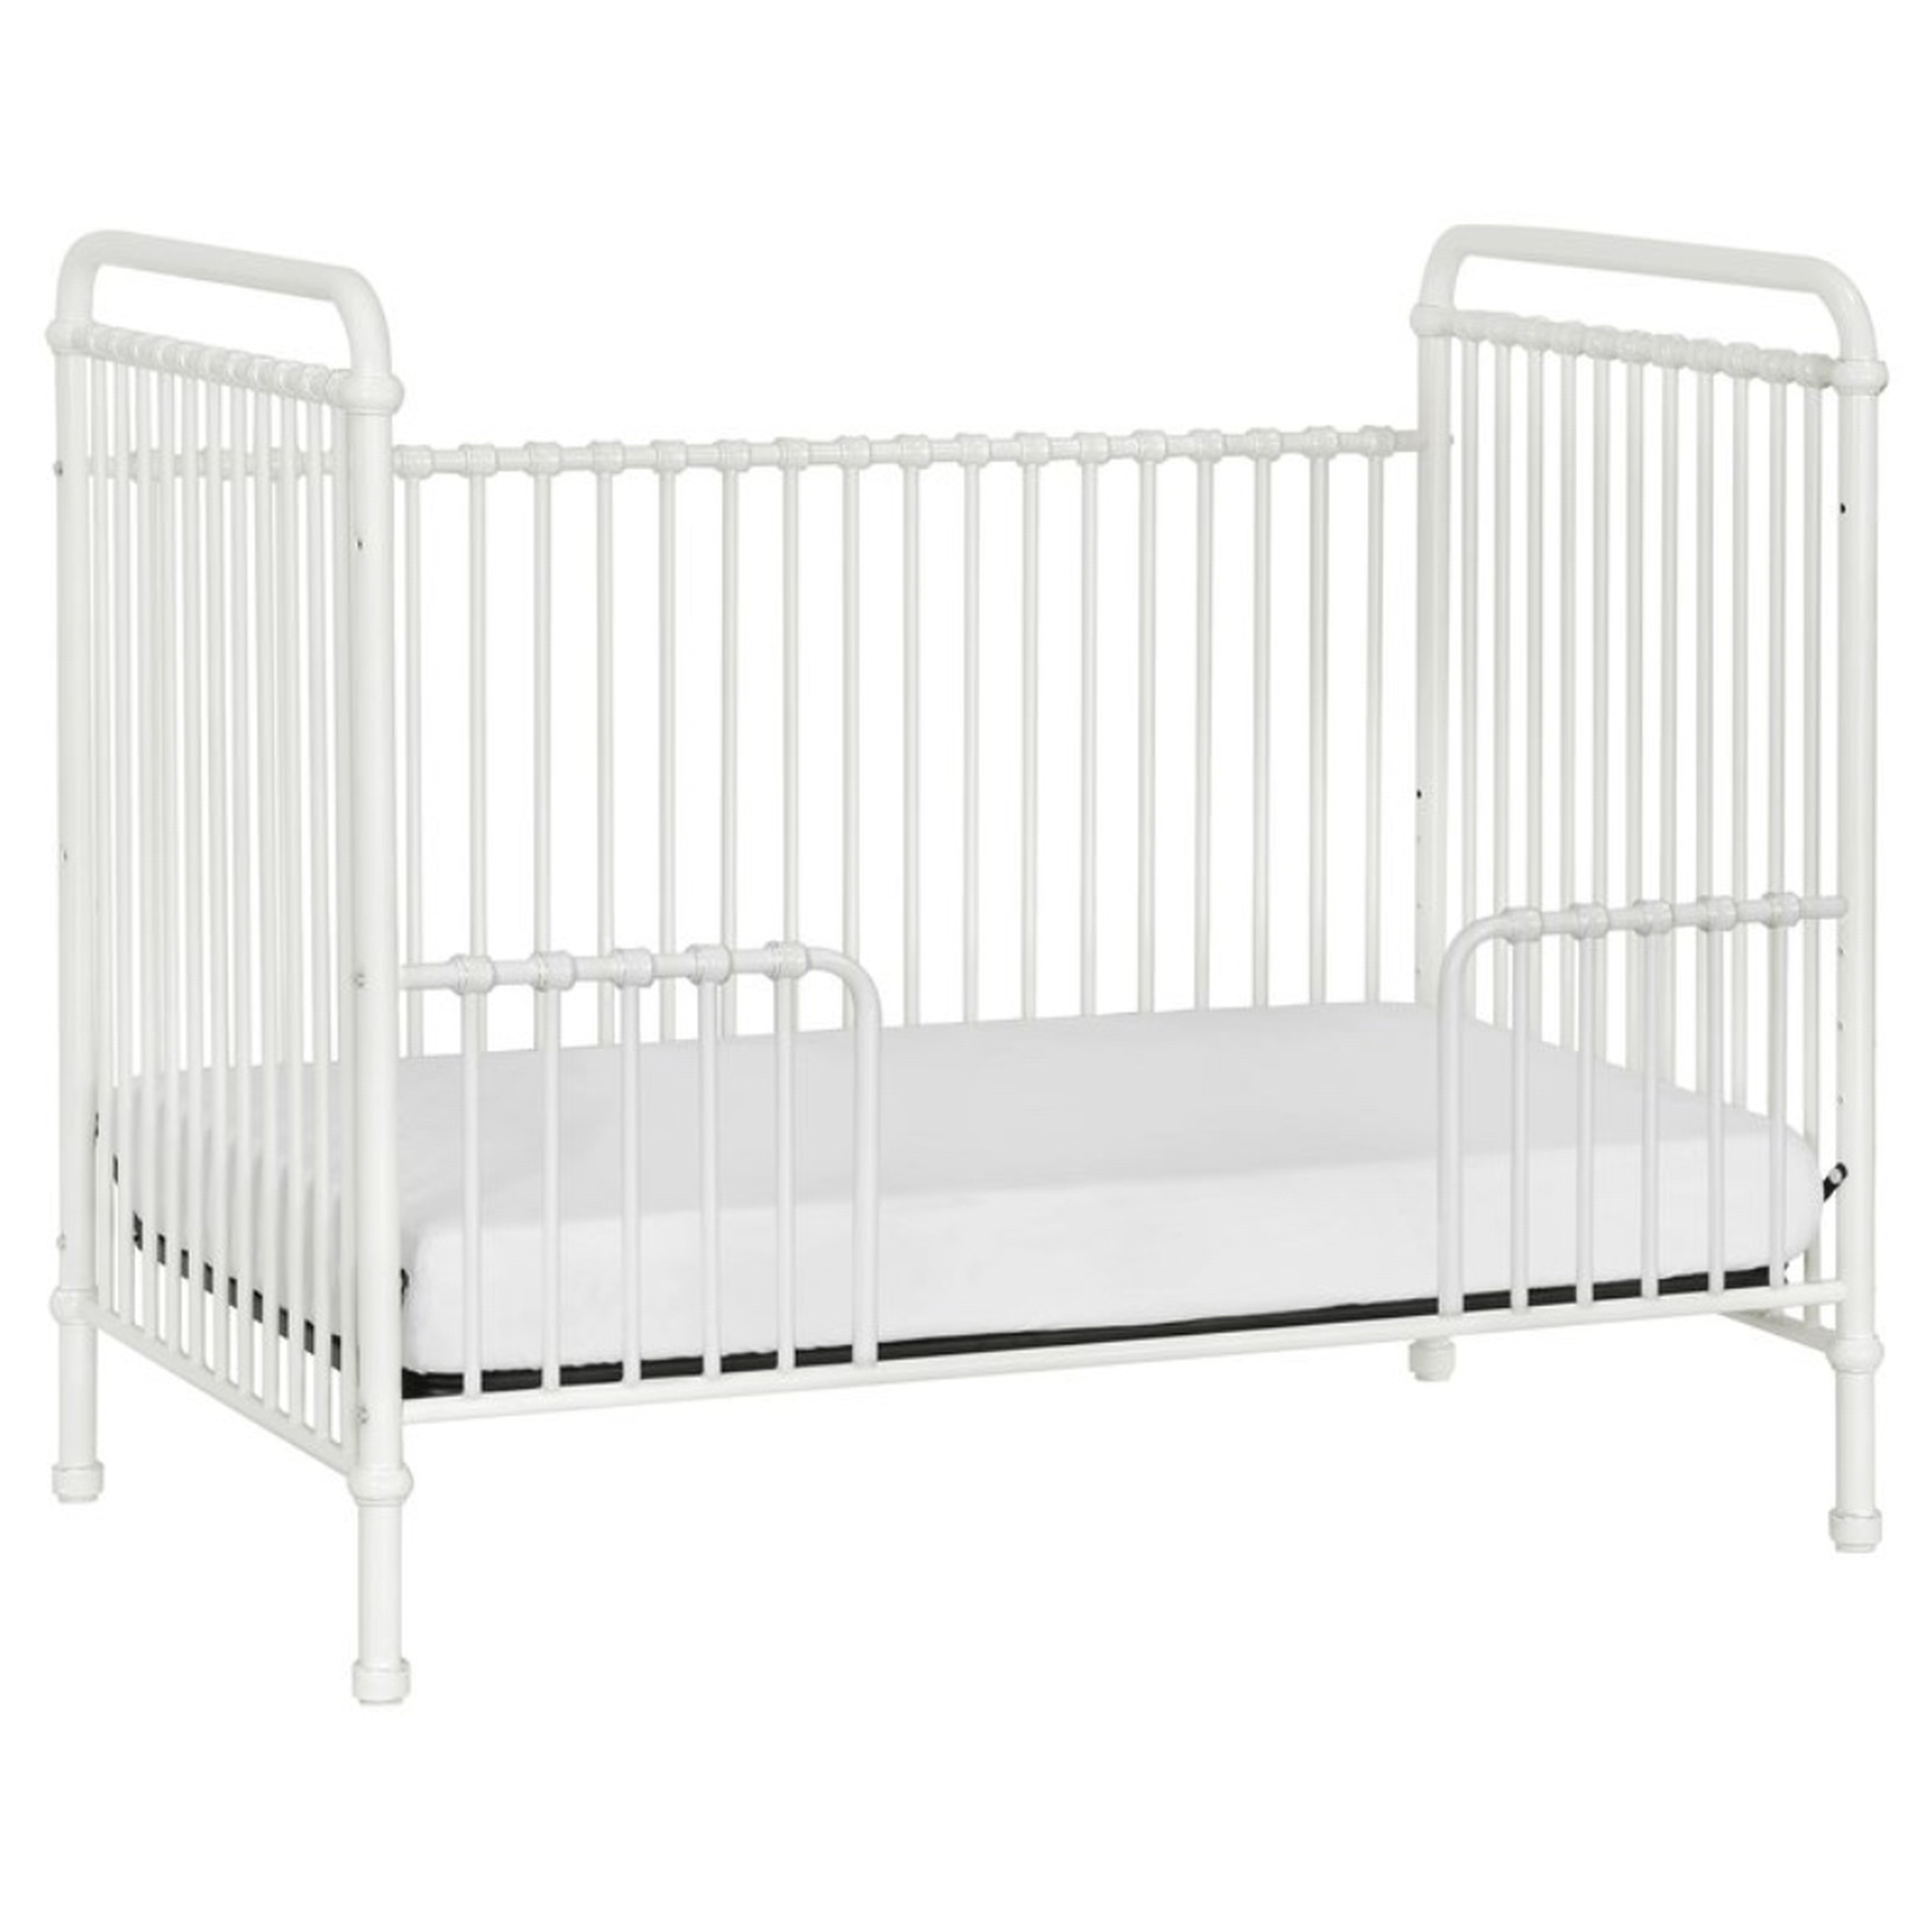 Aurora French Country Washed White Steel Convertible Crib with Kit - Kathy Kuo Home